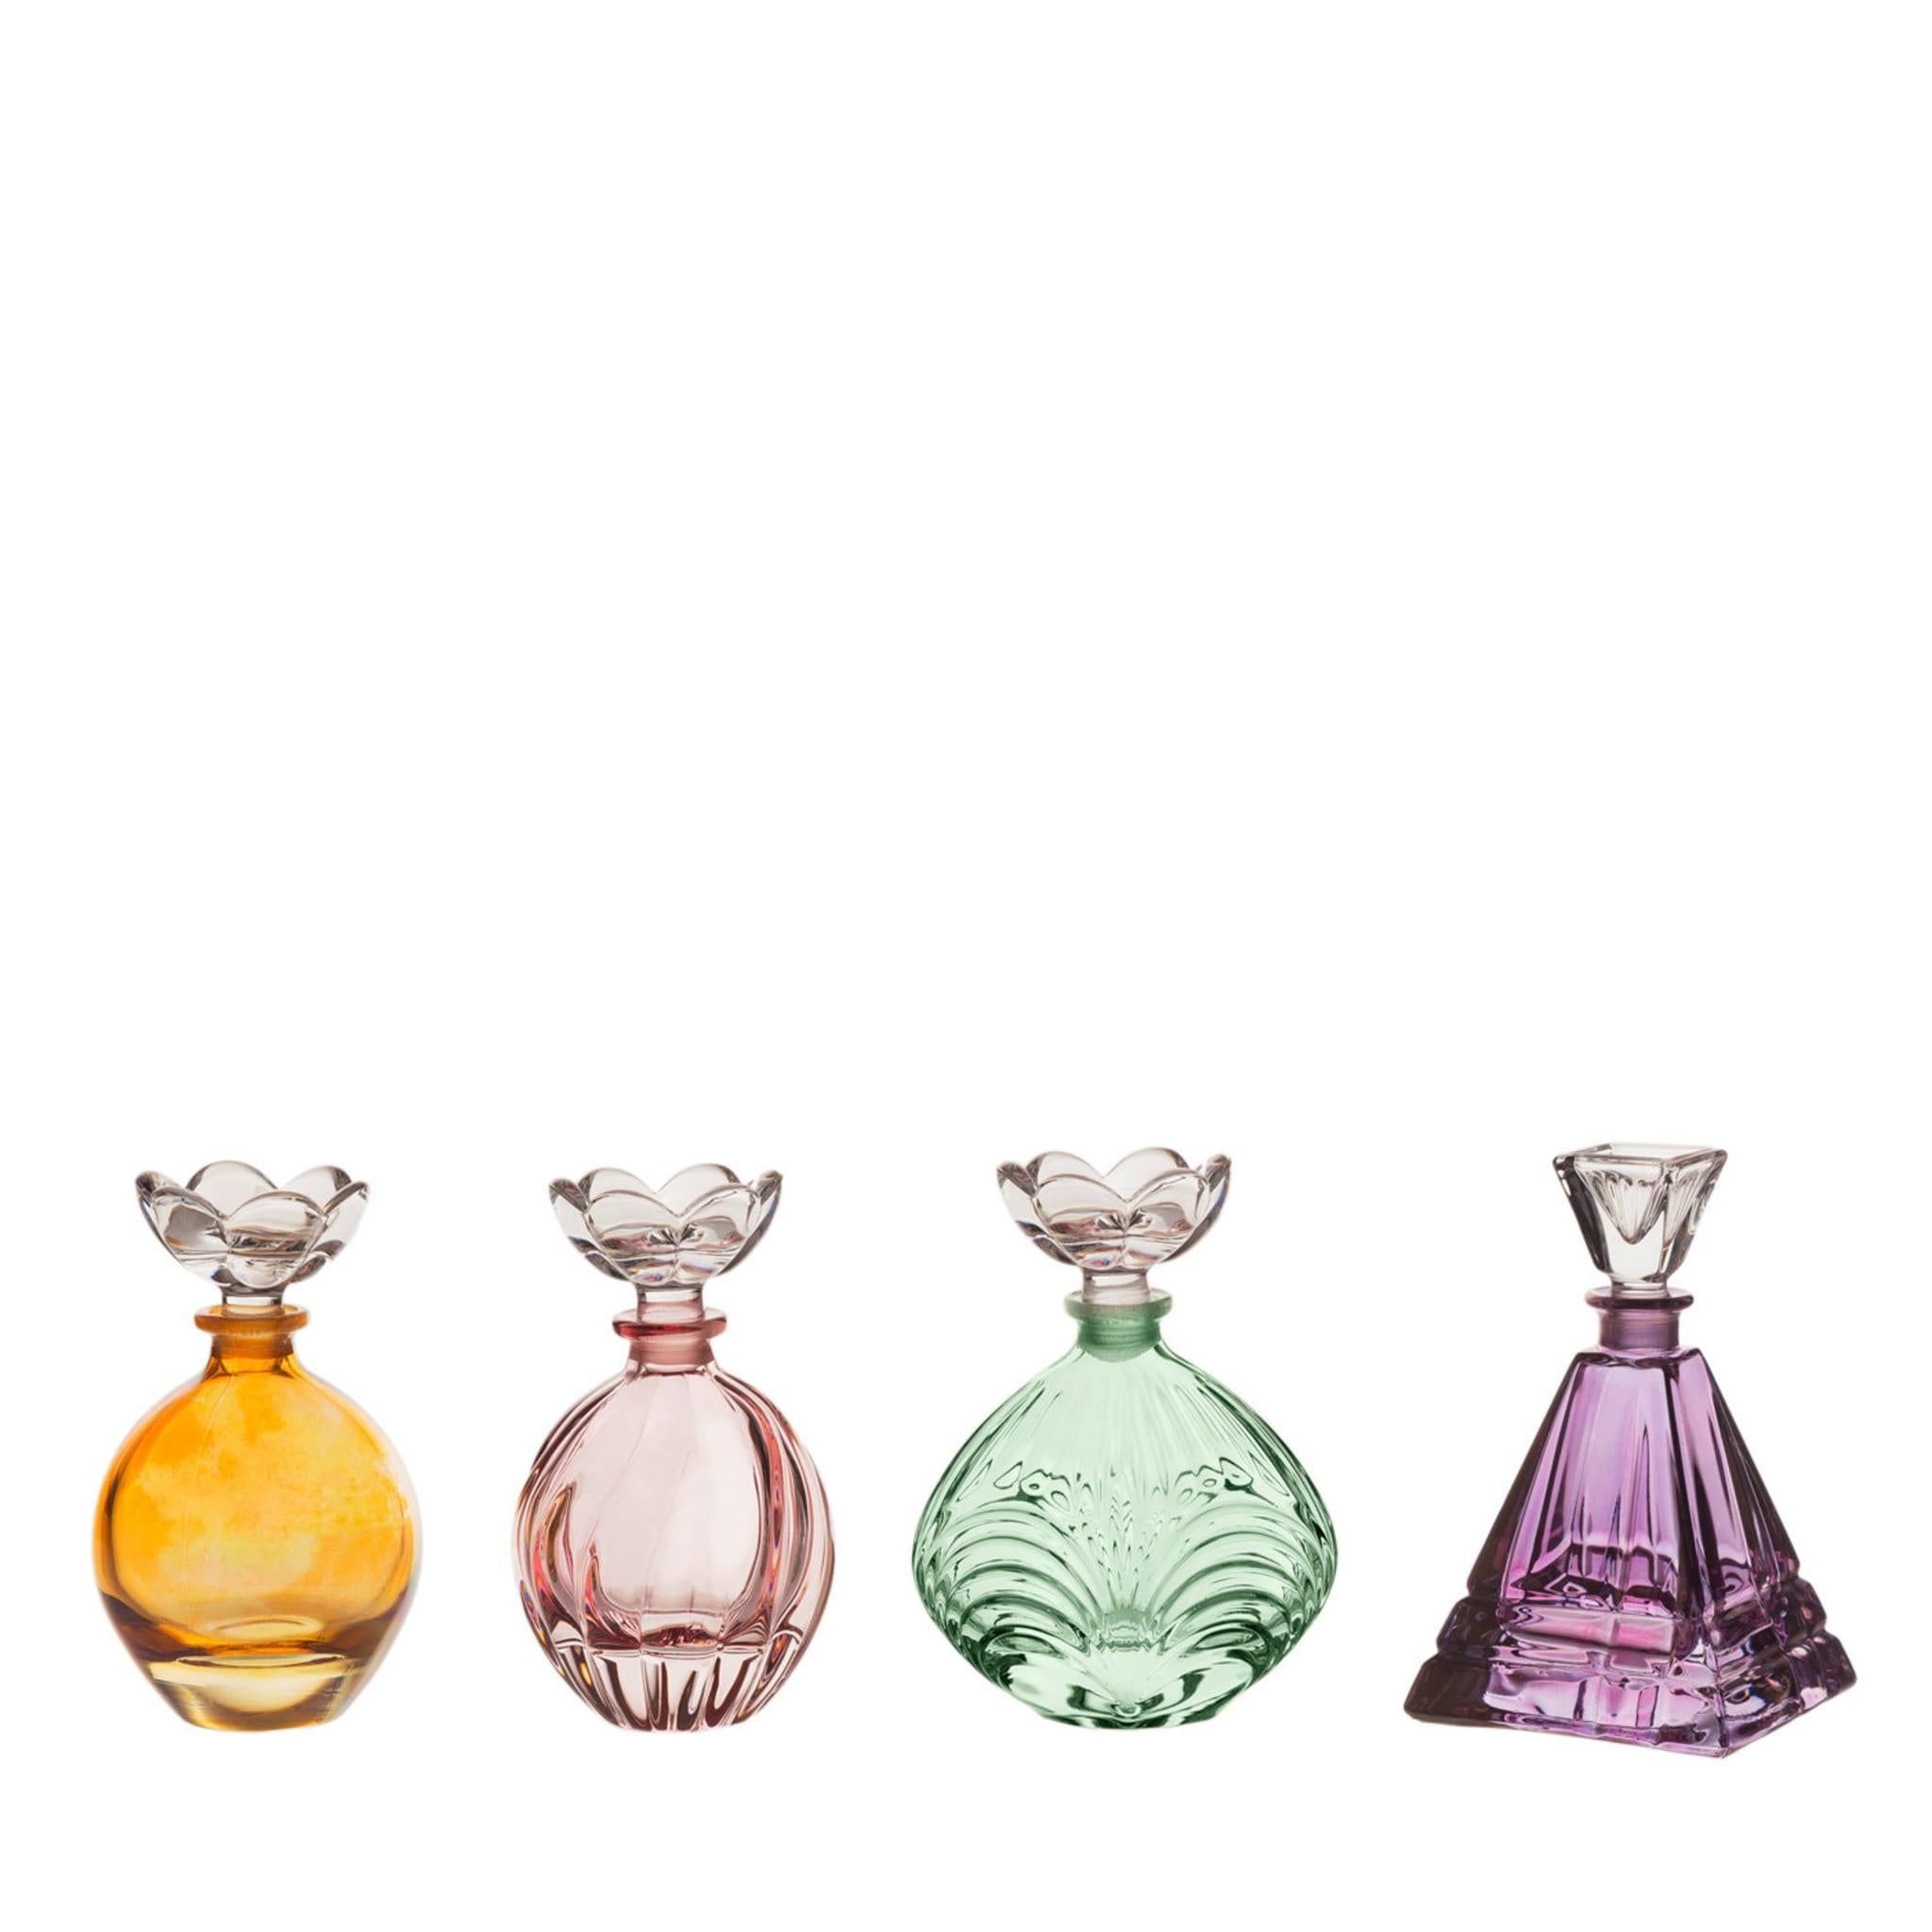 Part of the Xmas Collection, these elegant crystal perfume bottles are a superb addition to a vanity table in a bedroom or powder room. The traditional silhouette, the handmade etched decorations on the bottle, and the transparent, flower-shaped